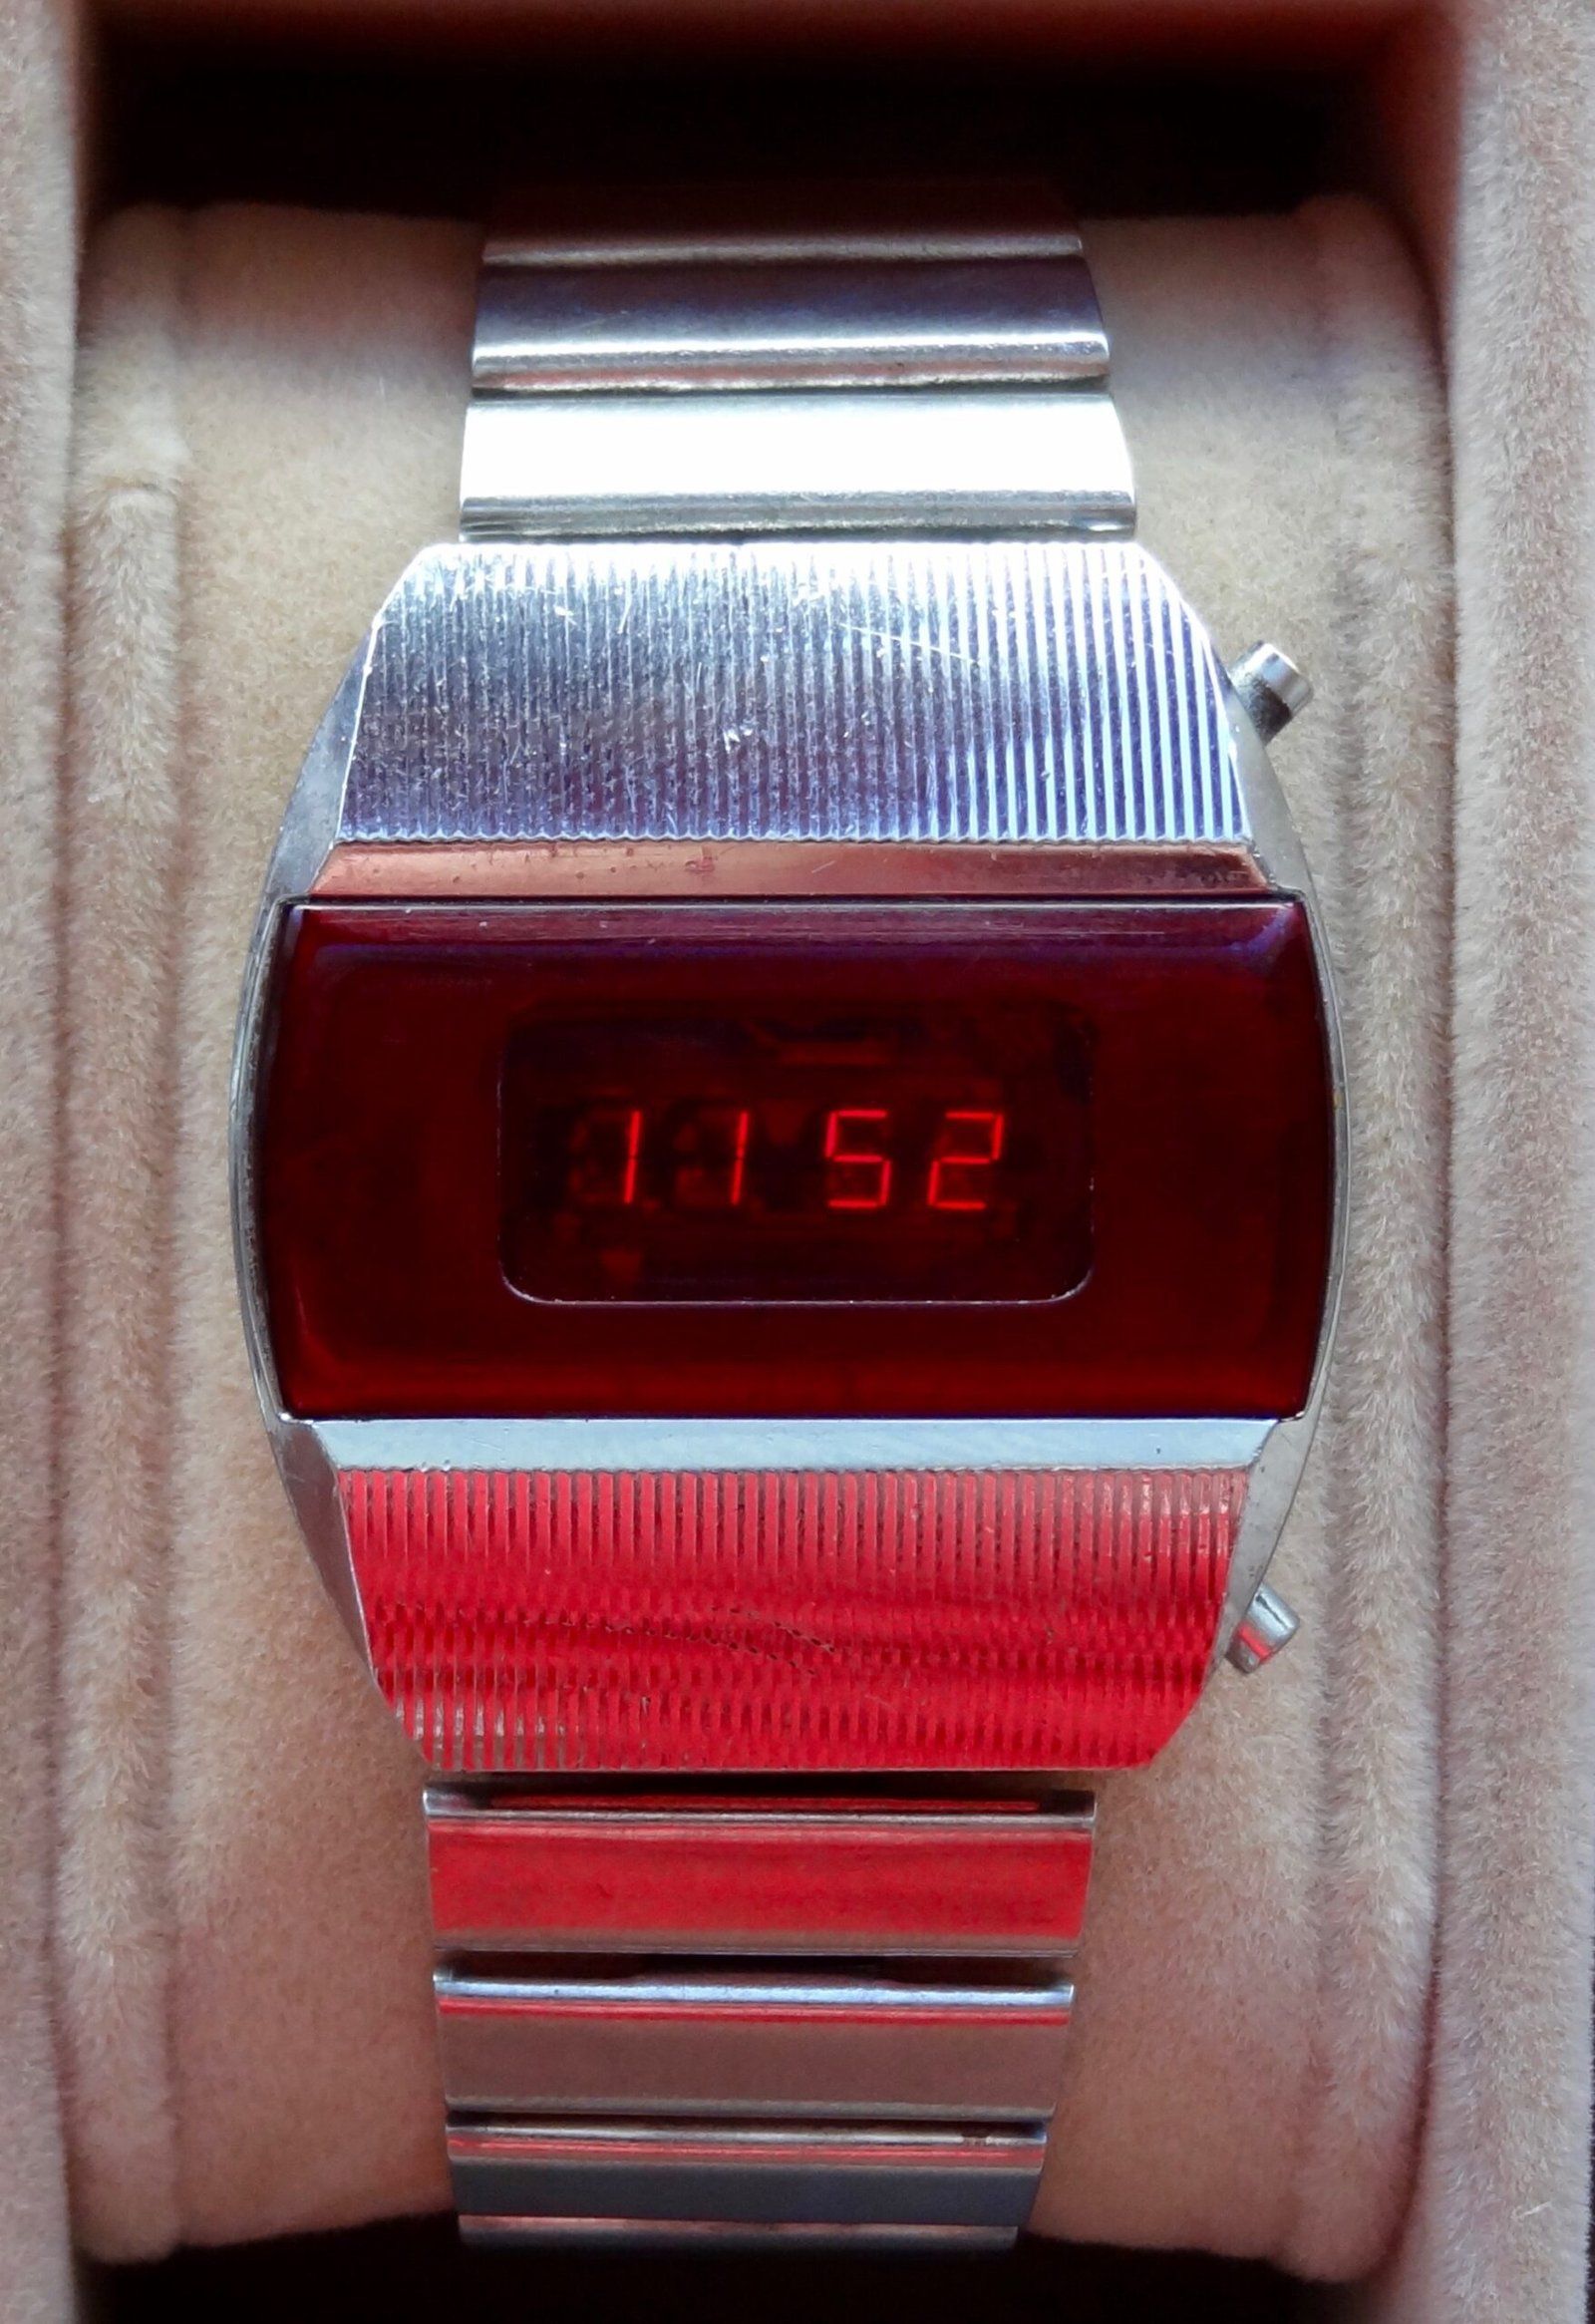 Soviet production LED watch very similar Hamilton Pulsar the Electronika 1 watch (Courtesy: Dashiell Stanford; https://mroatman.wixsite.com/watches-of-the-ussr)